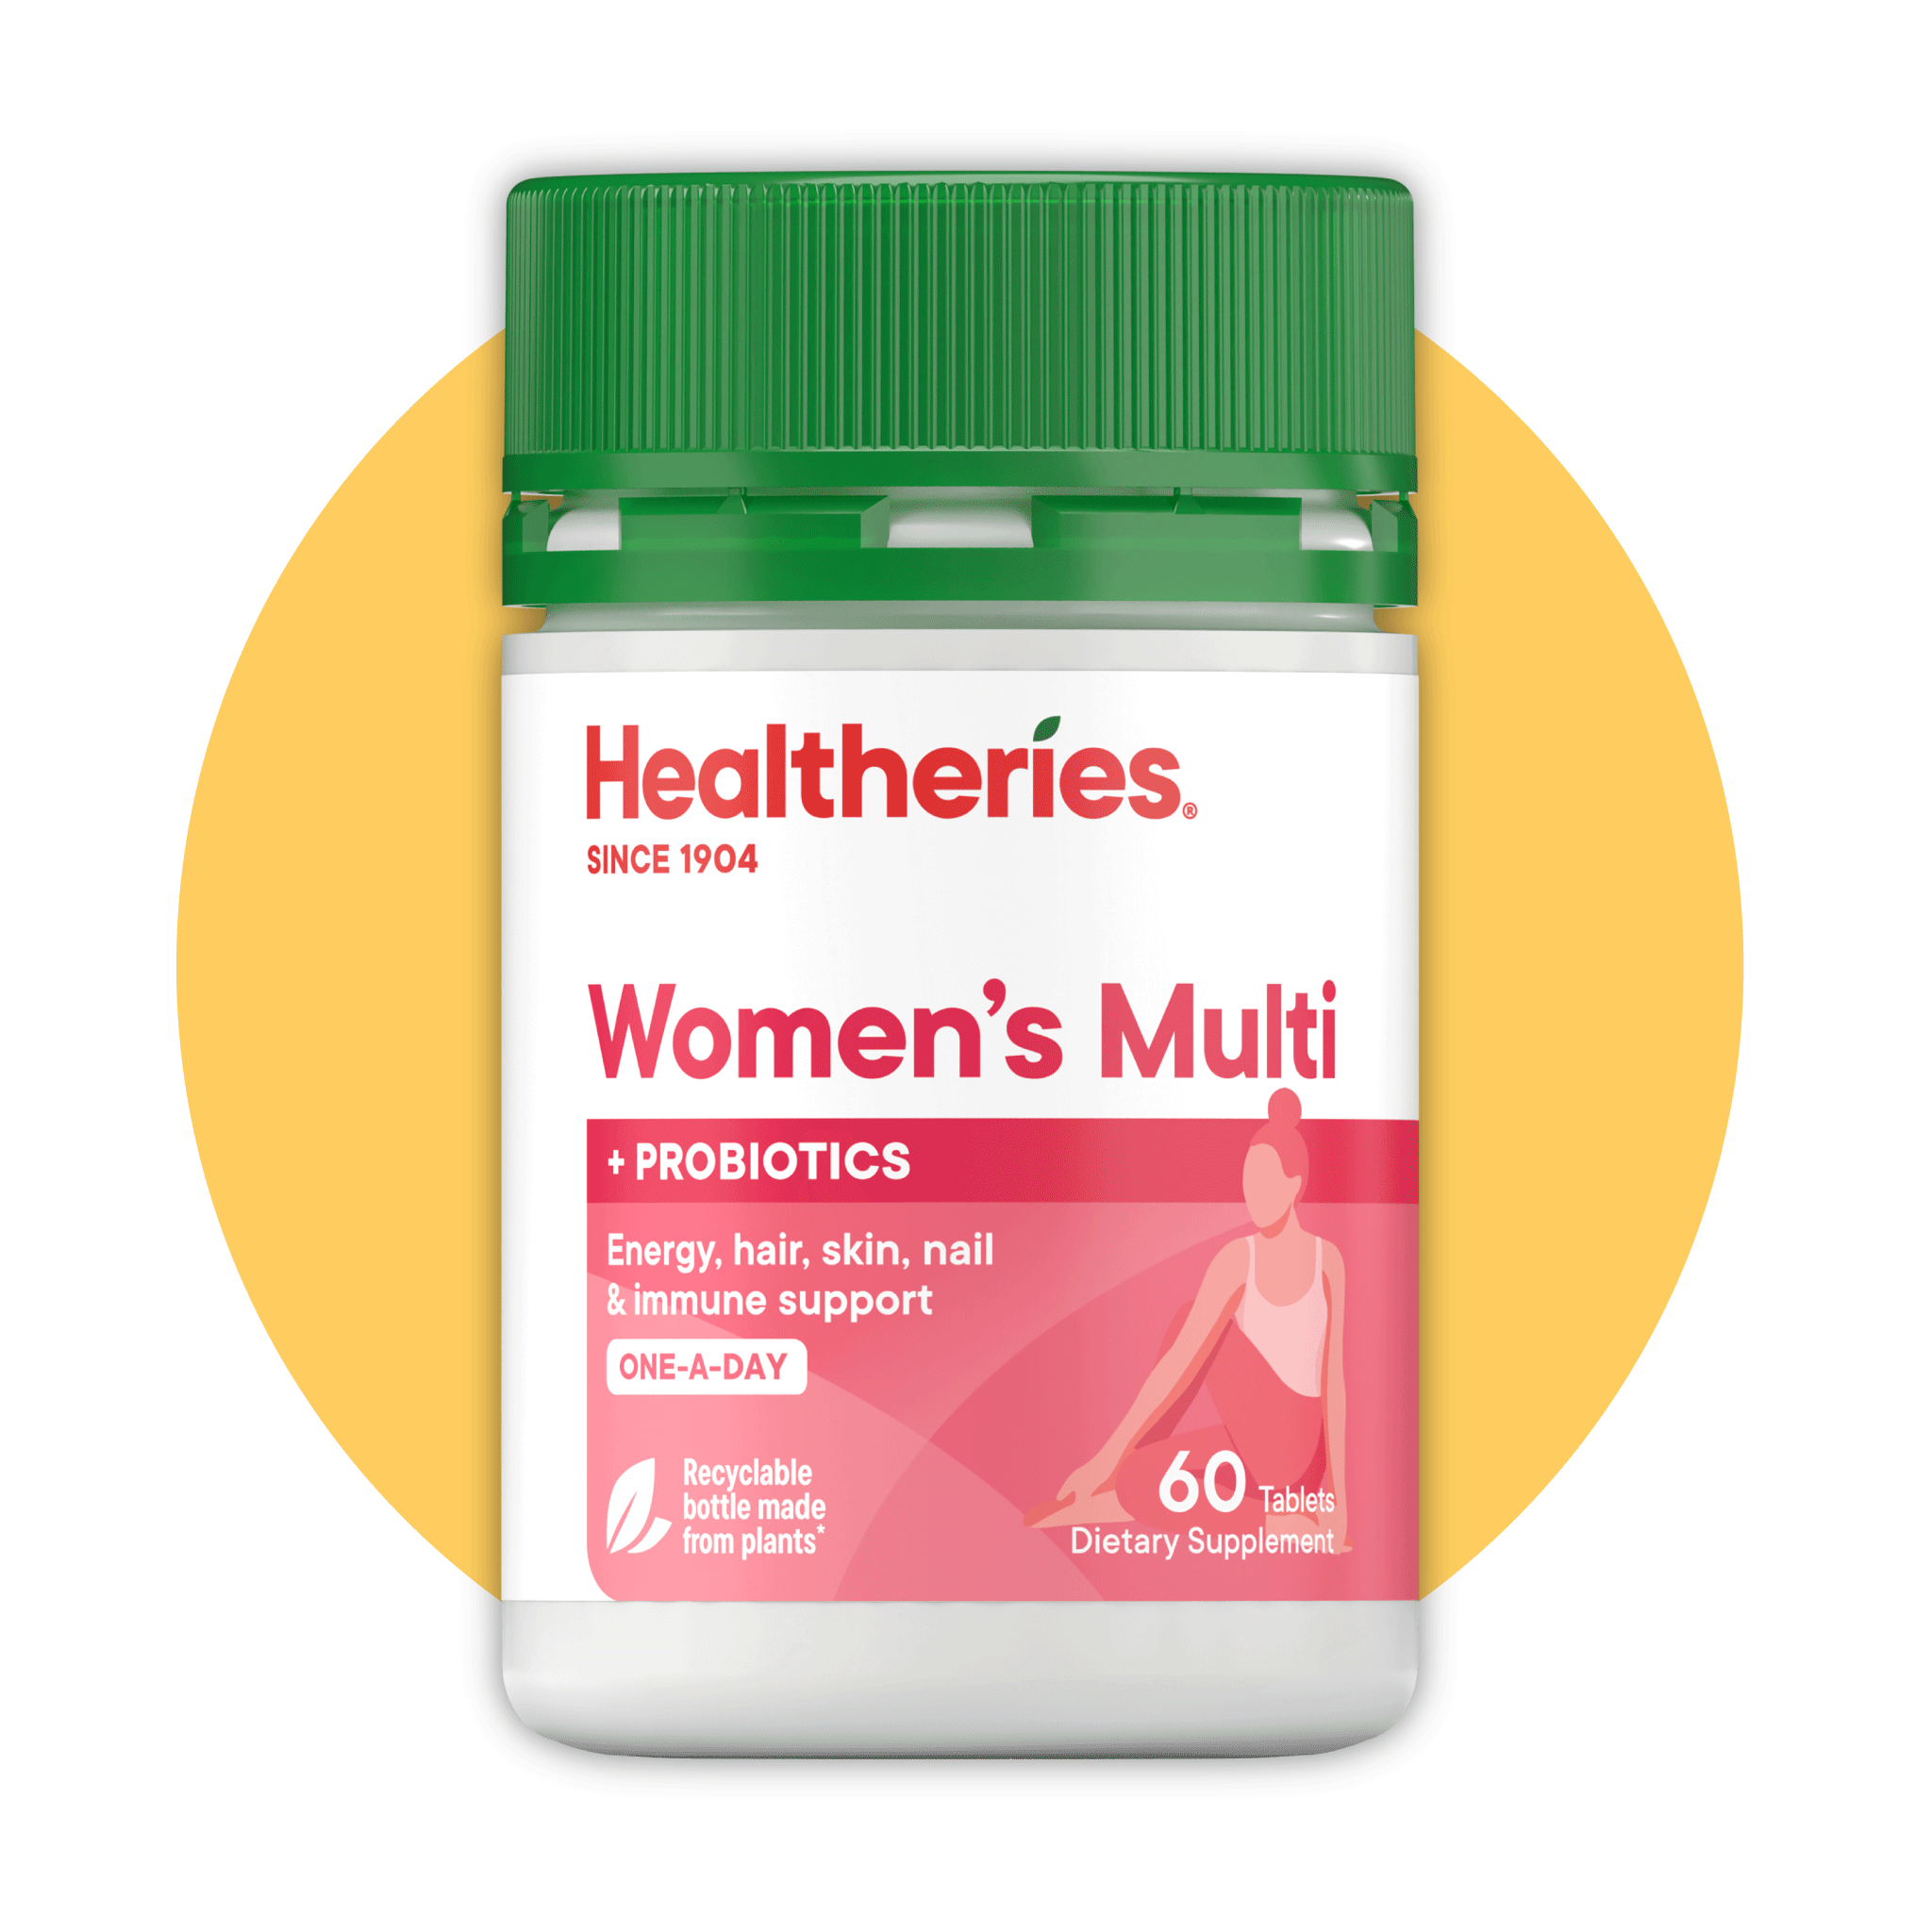 Women's Multi Tablets 60s - Healtheries Hong Kong